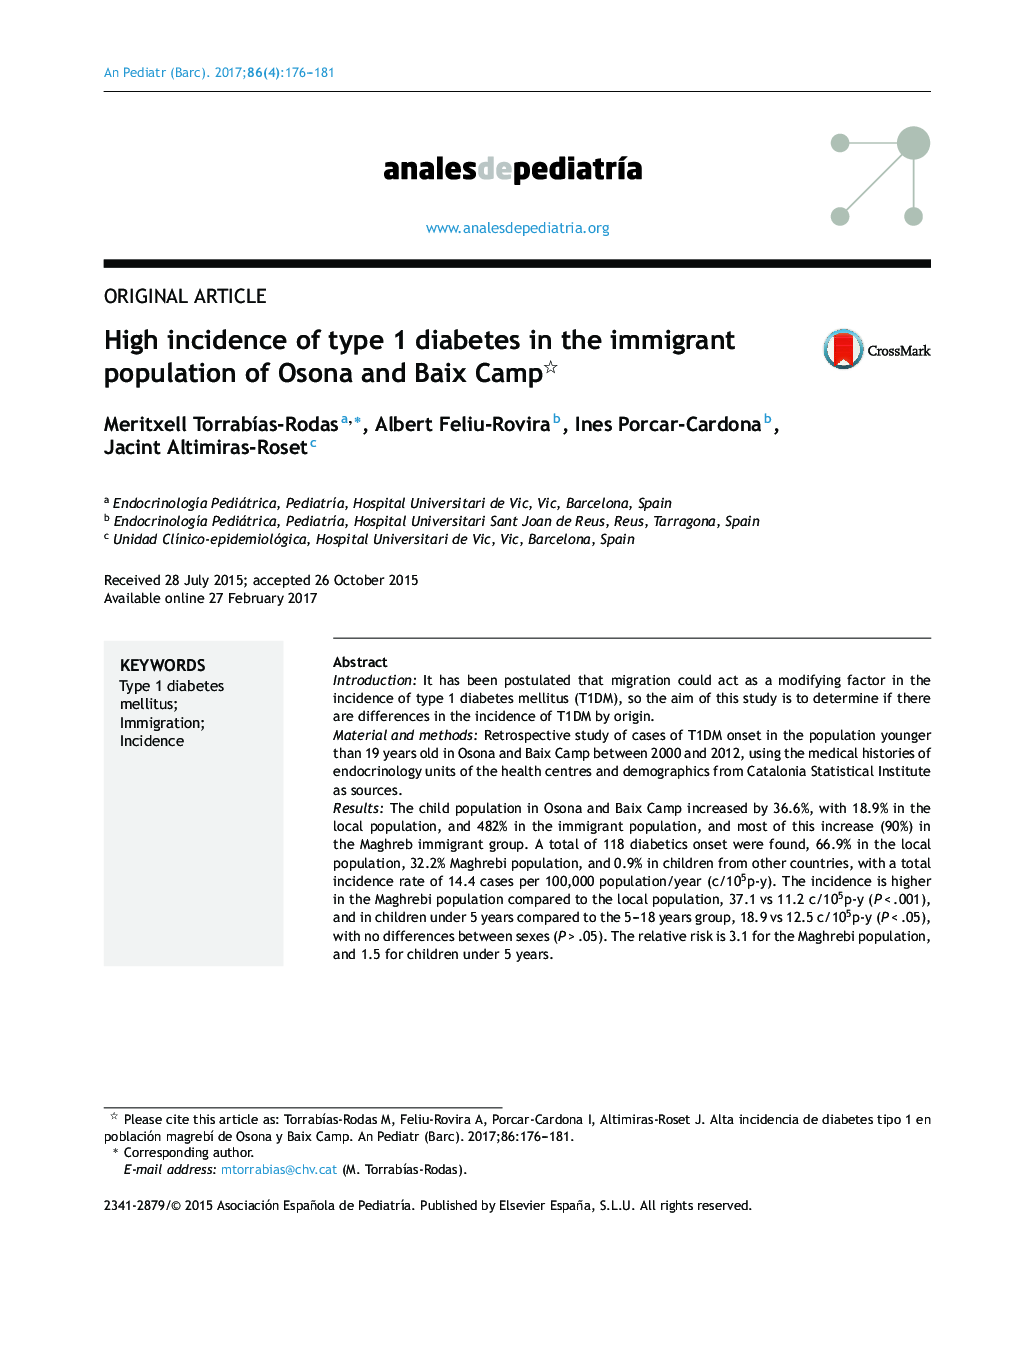 High incidence of type 1 diabetes in the immigrant population of Osona and Baix Camp